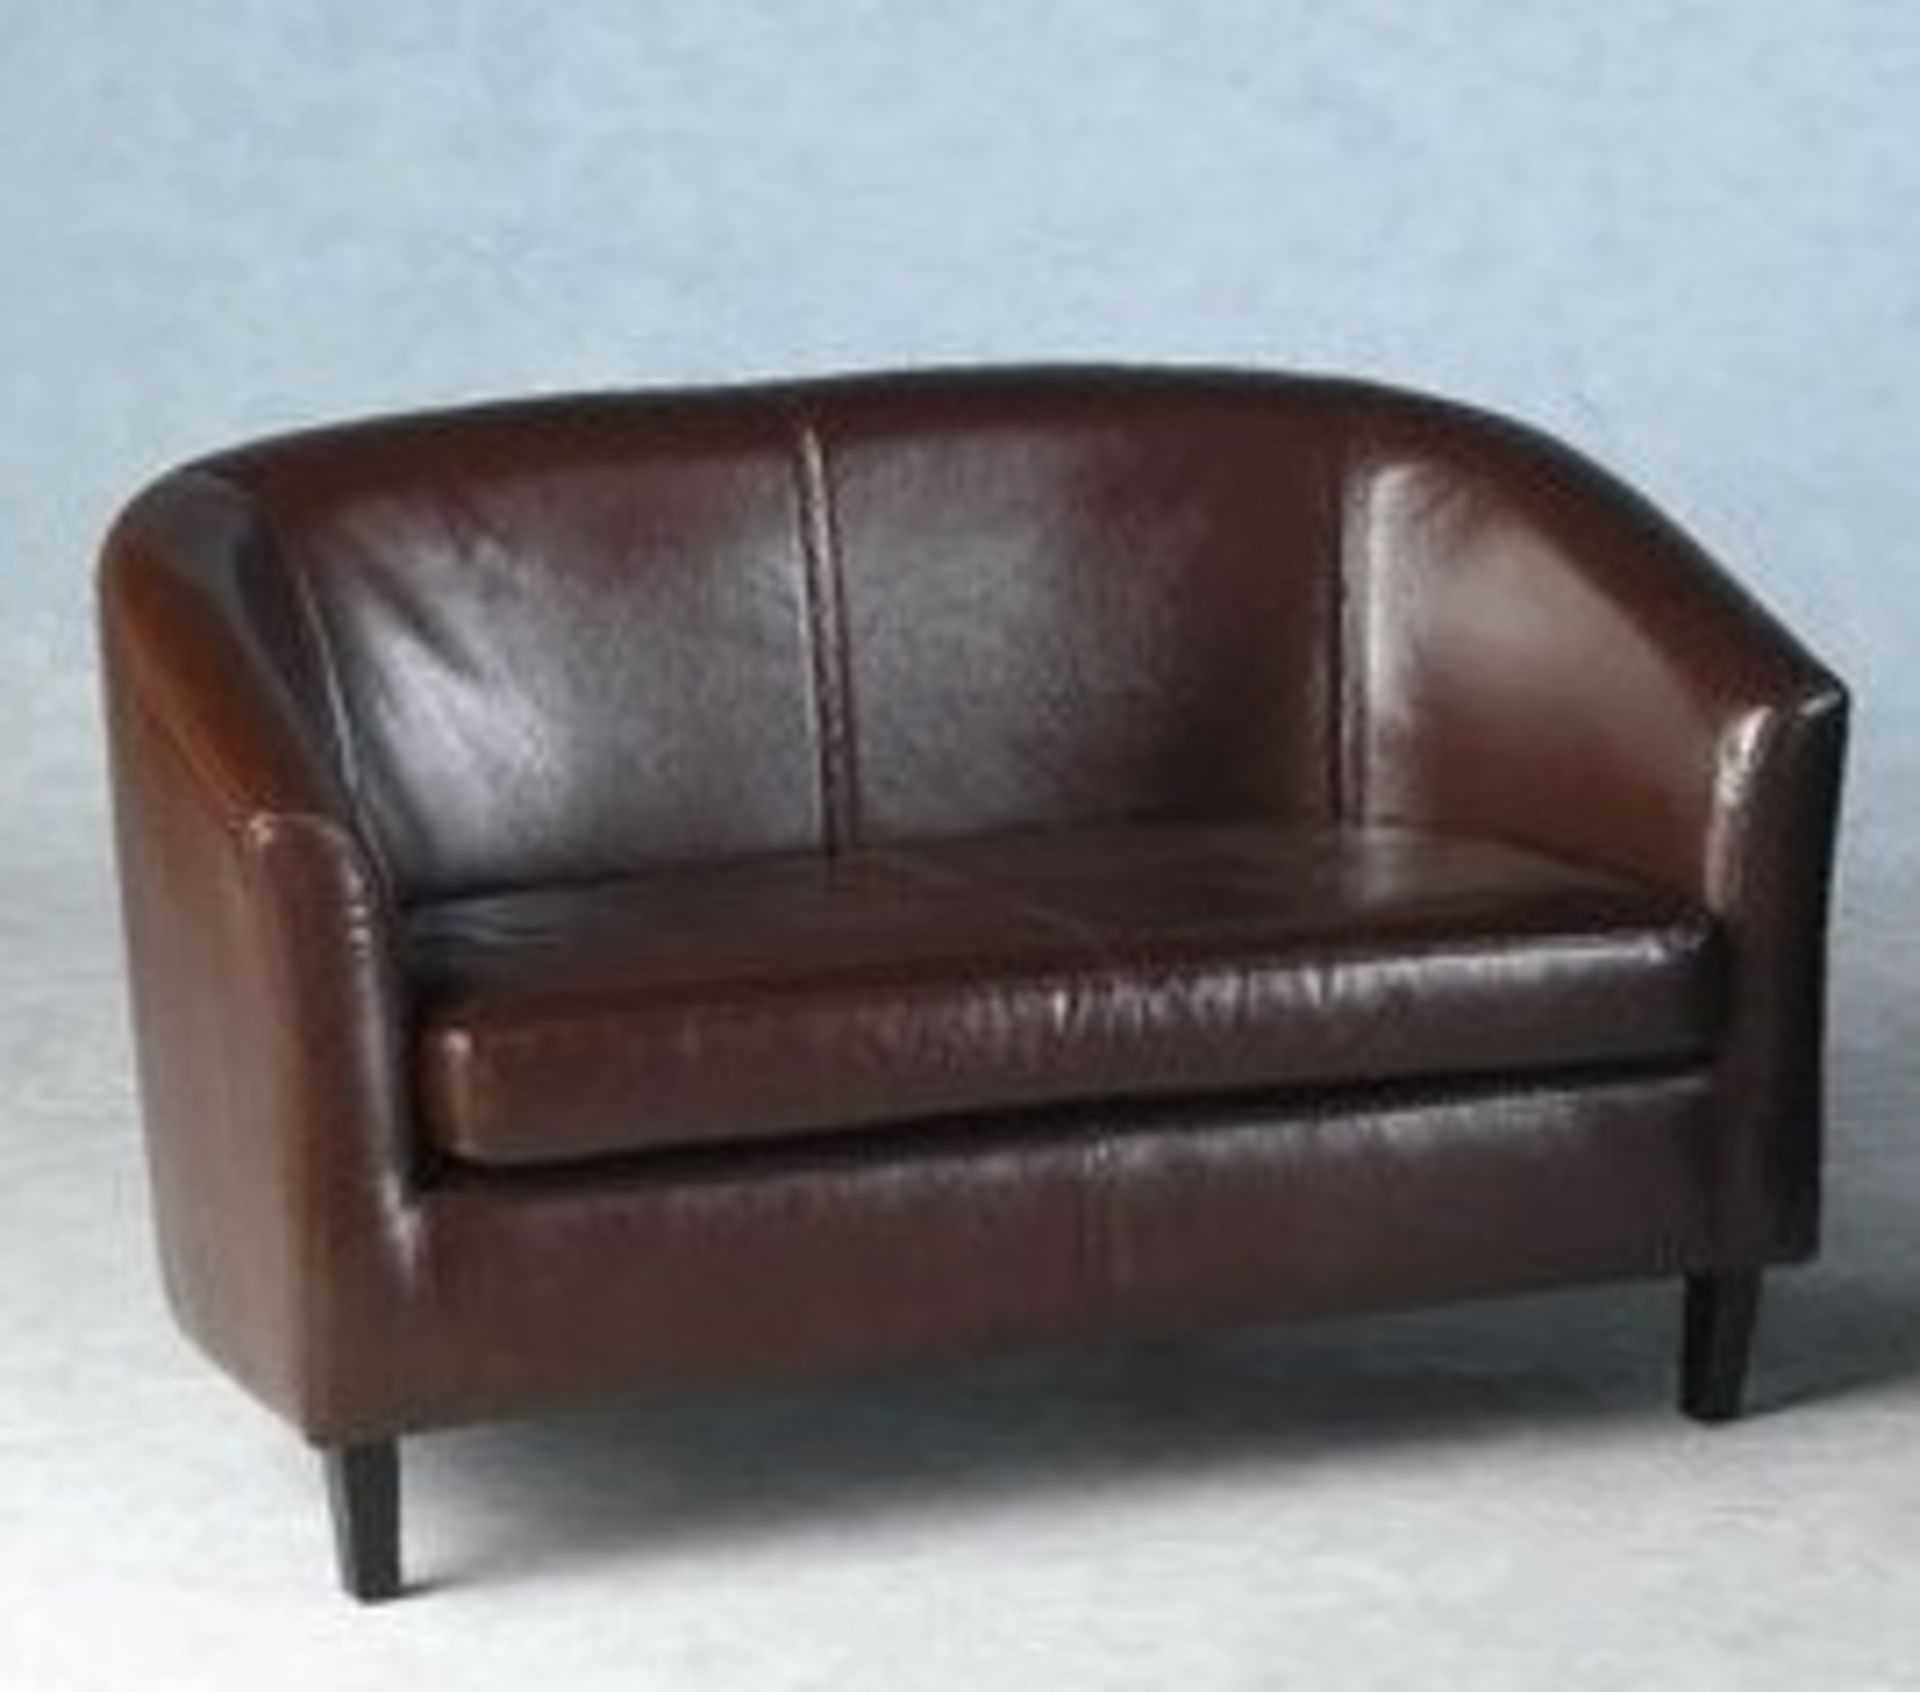 Brand new boxed direct from the manufacturers, Brown faux leather 2 seater tub sofa with dark brown